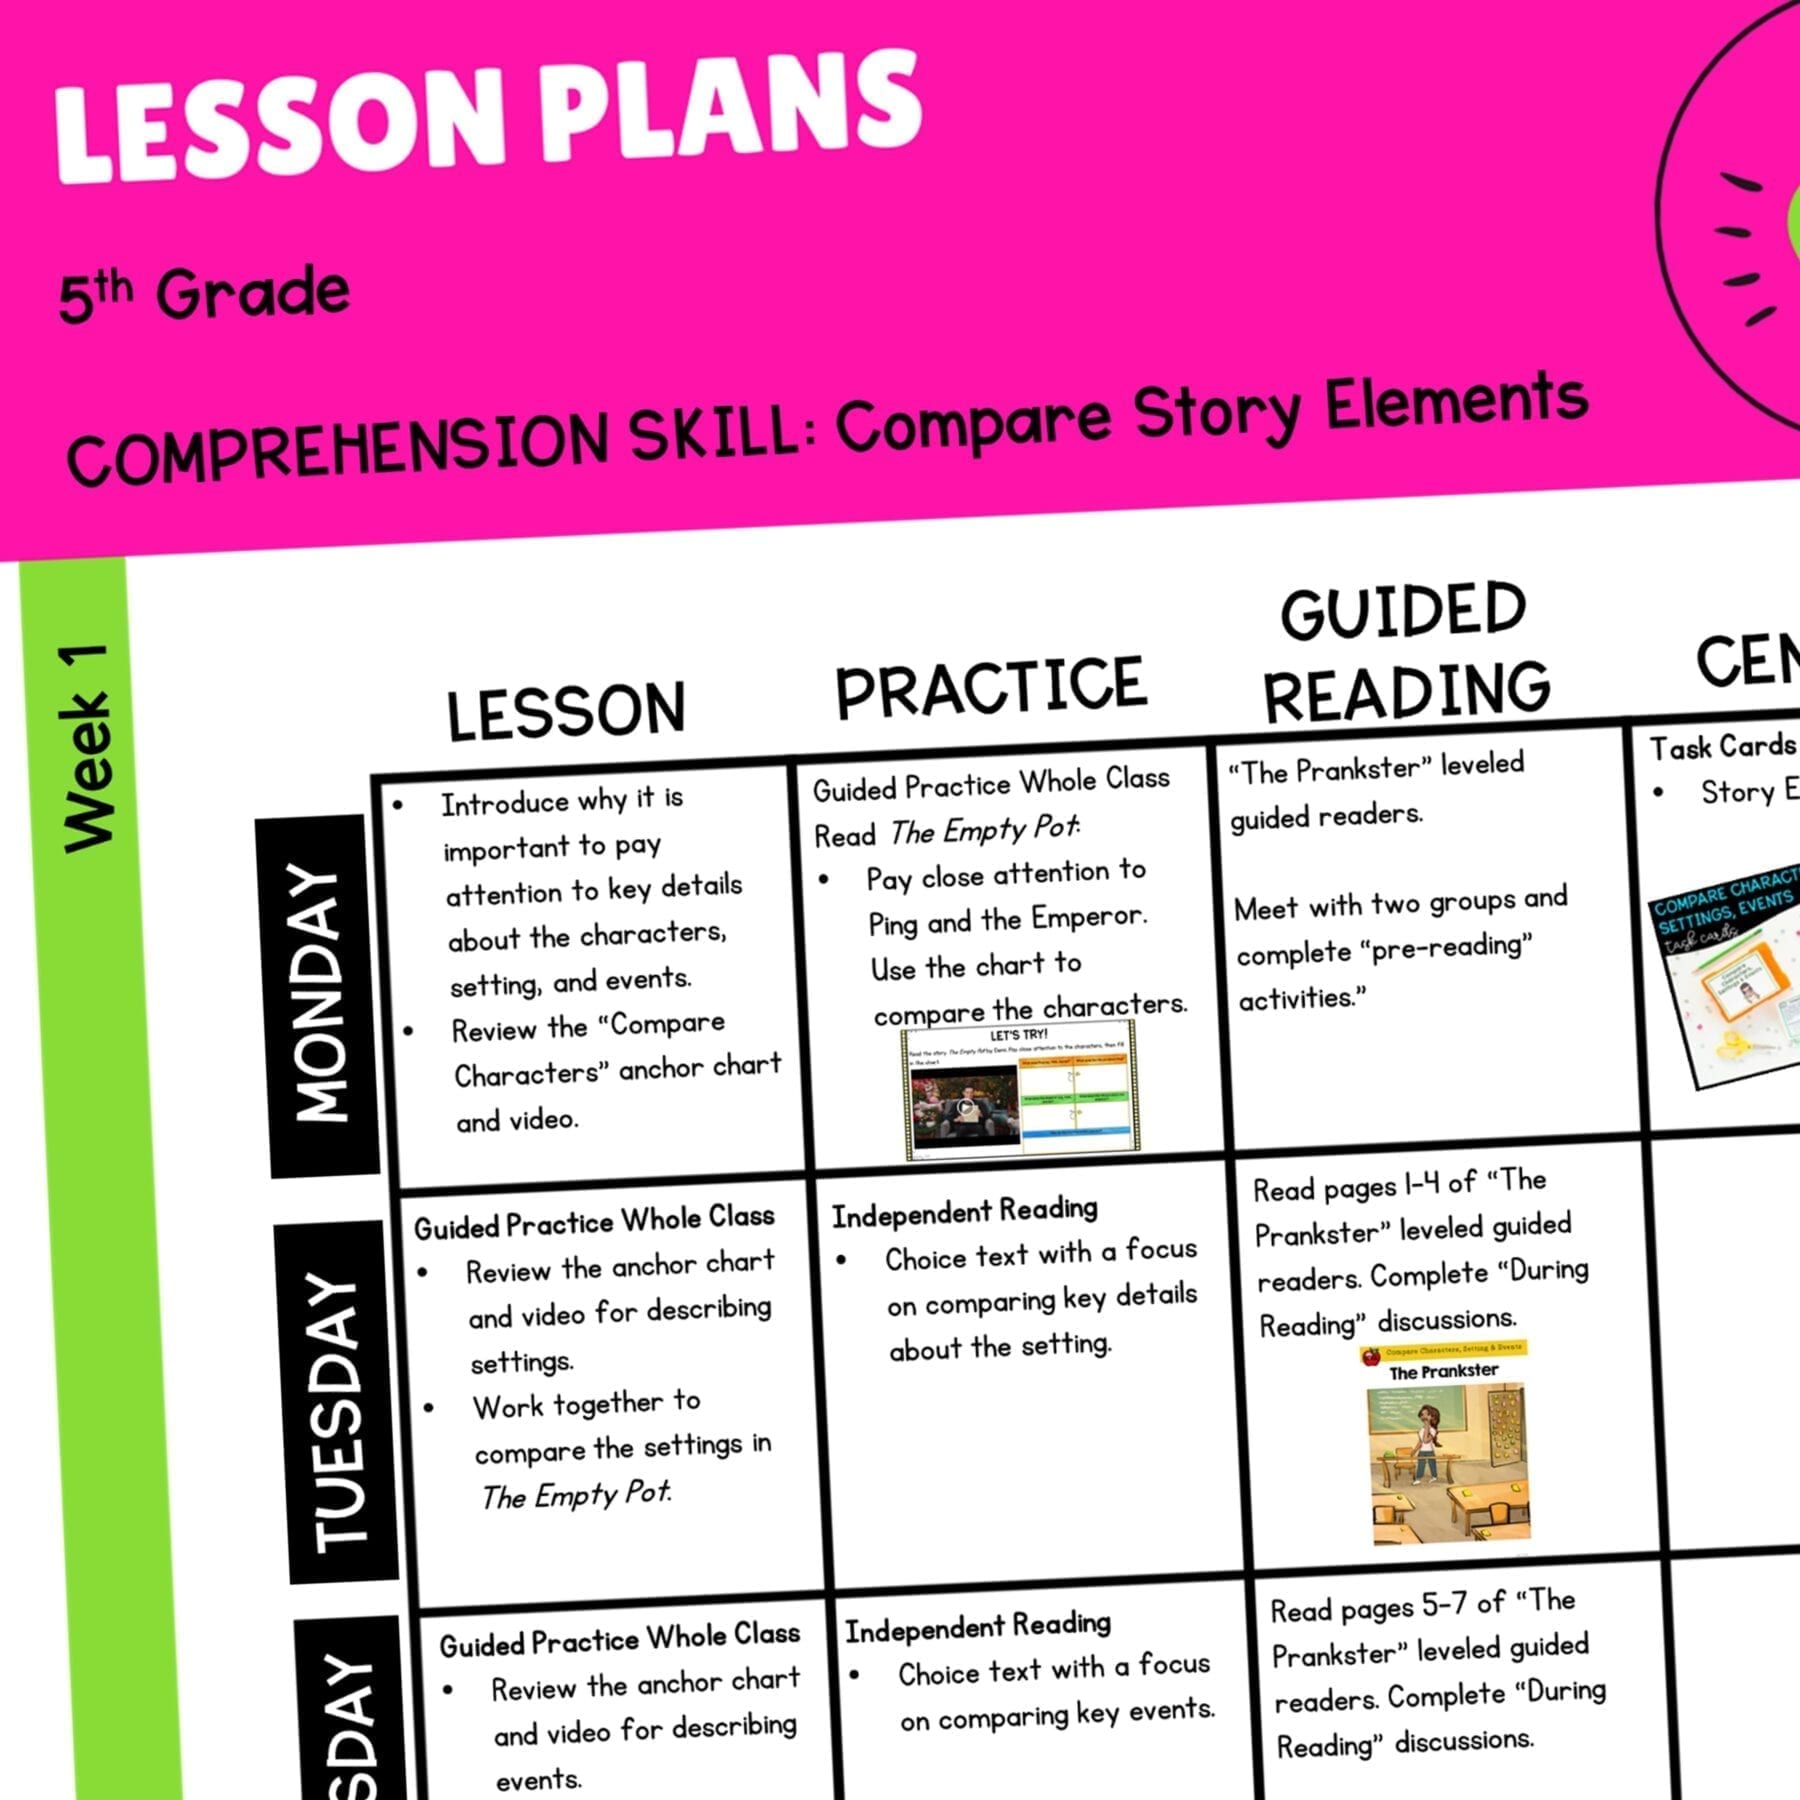 RL.5.3 Lesson plans for 5th grade reading comprehension using digital and printable resources